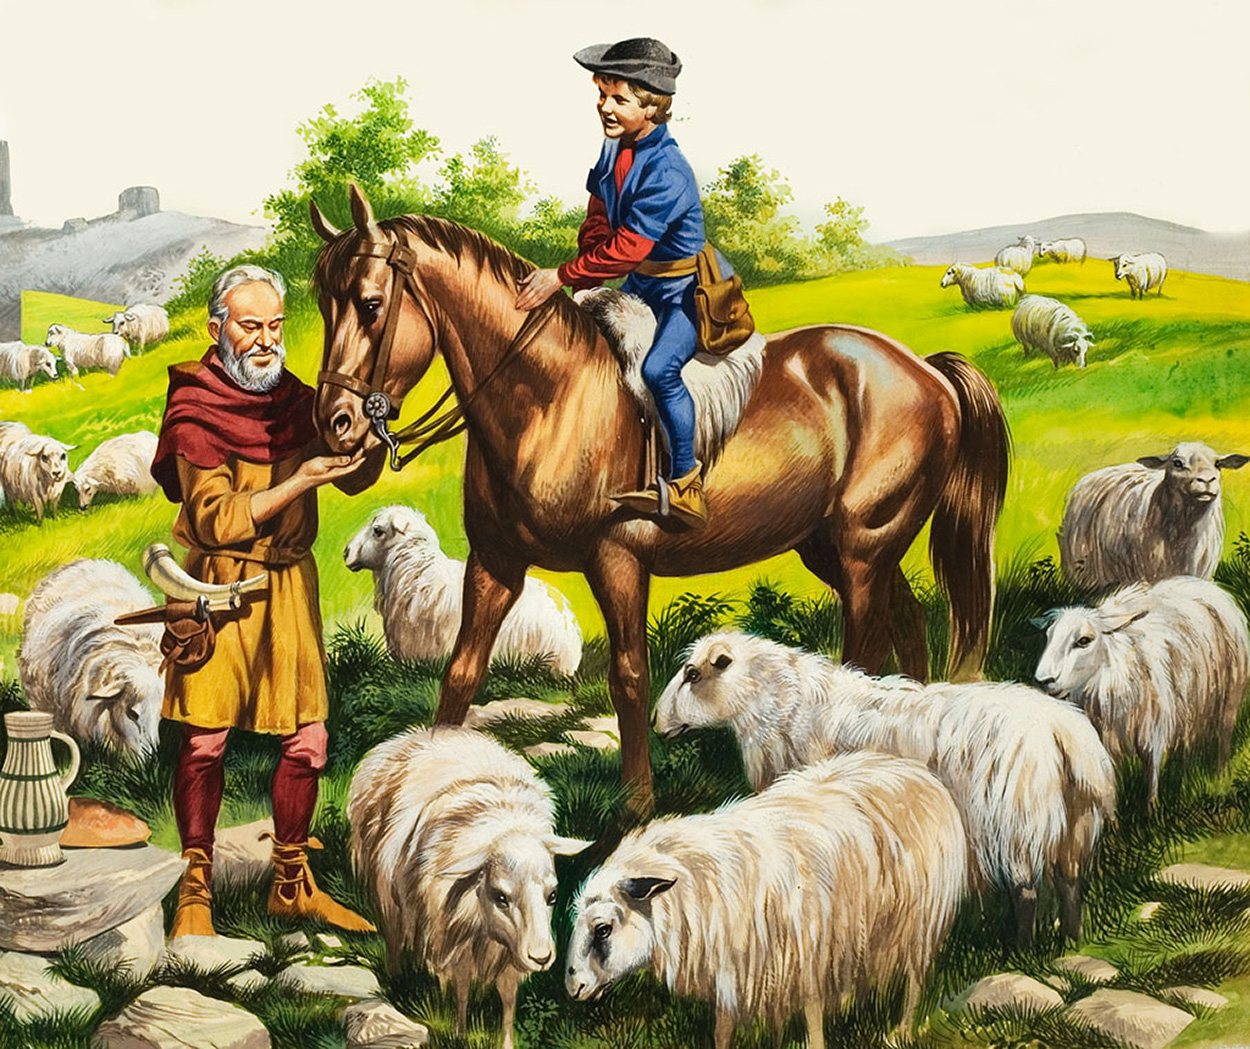 Growing Up in Times Gone By: A Farmer's Boy in the Fifteenth Century (Original) art by More Children's Stories (Ron Embleton) at The Illustration Art Gallery